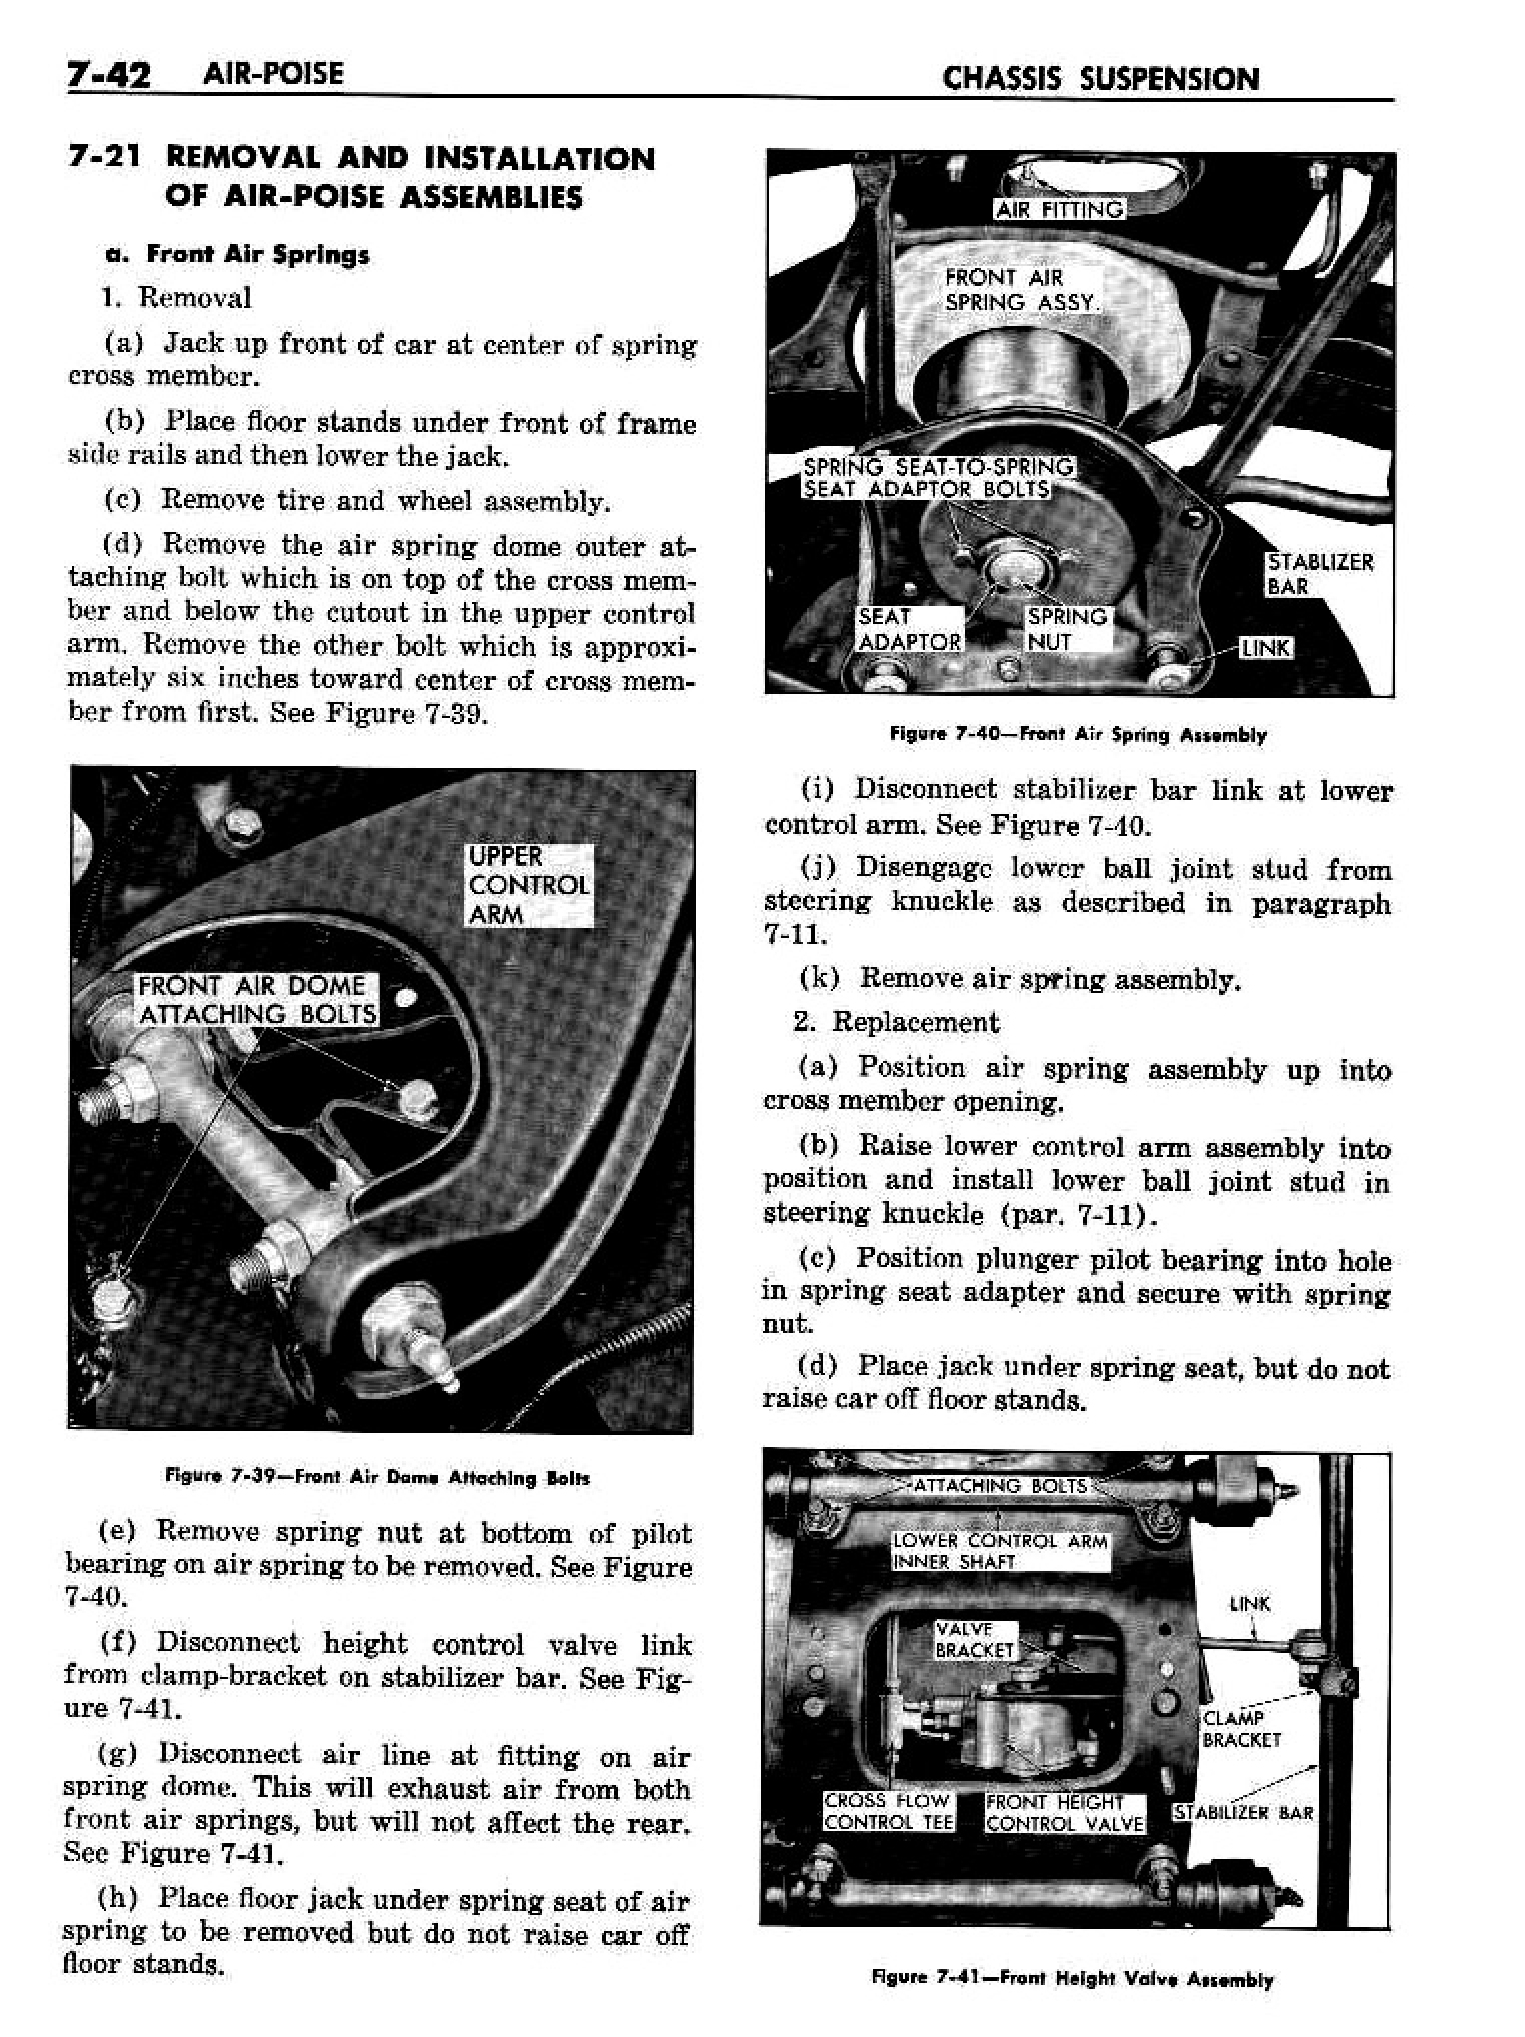 n_08 1958 Buick Shop Manual - Chassis Suspension_42.jpg